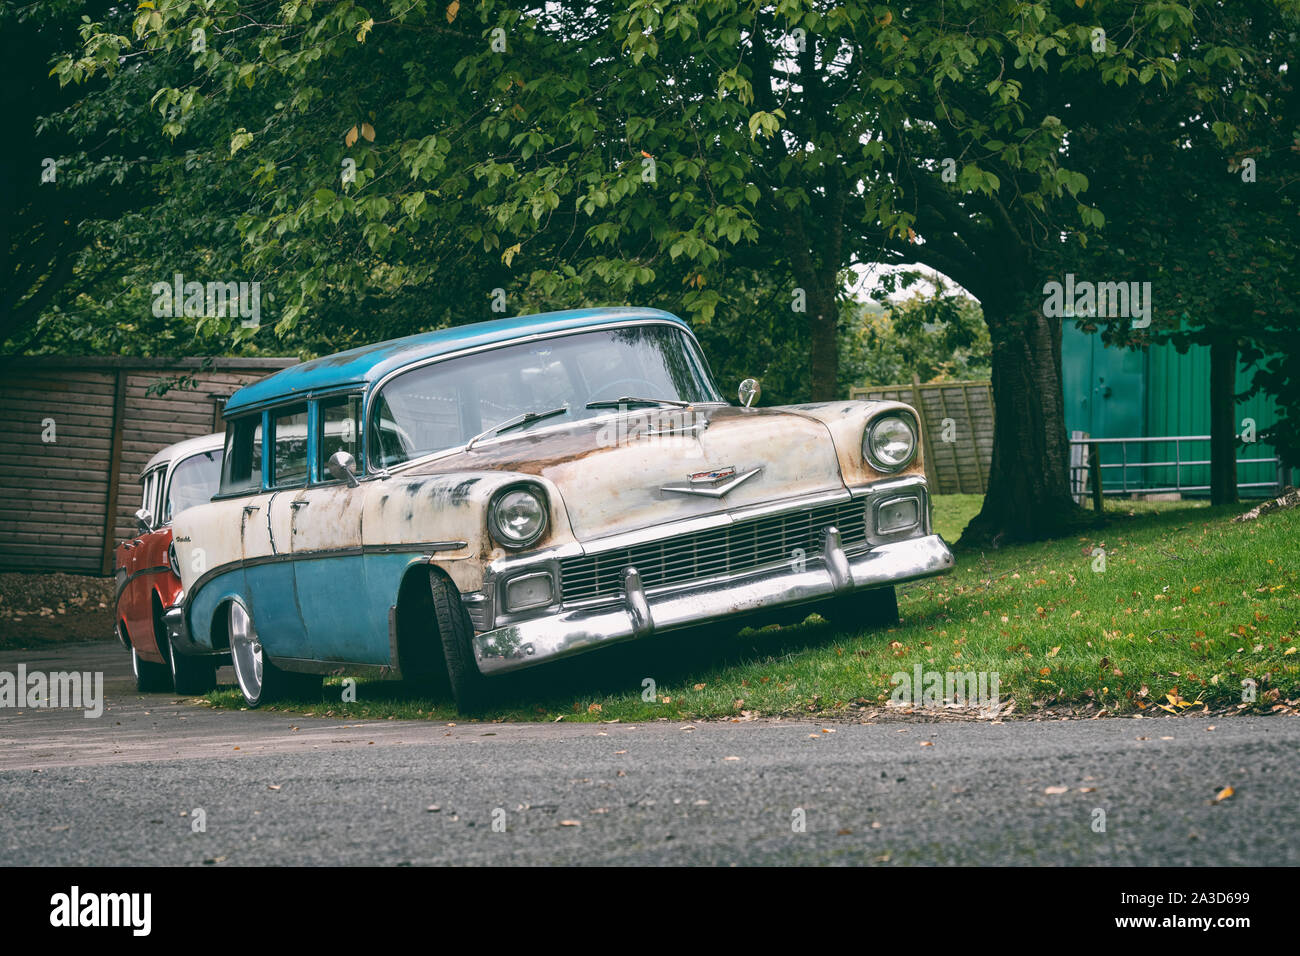 1956 and 1957 Chevrolet Bel Air station wagons at a Prescott hill climb event. Gloucestershire, England. Vintage filter applied Stock Photo